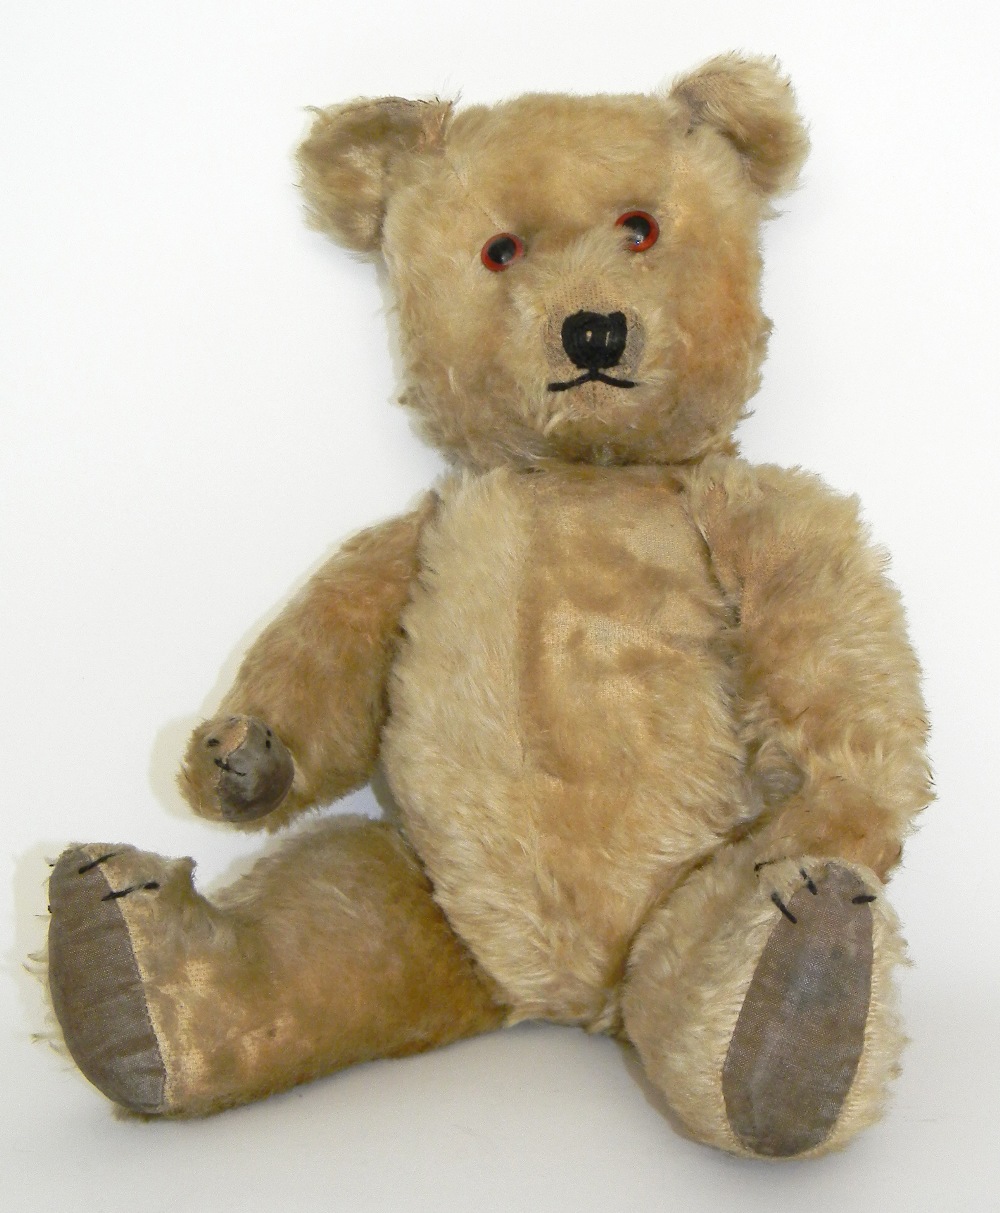 Chiltern Teddy bear, English 1950’s, light brown mohair bear with orange plastic eyes, stitched